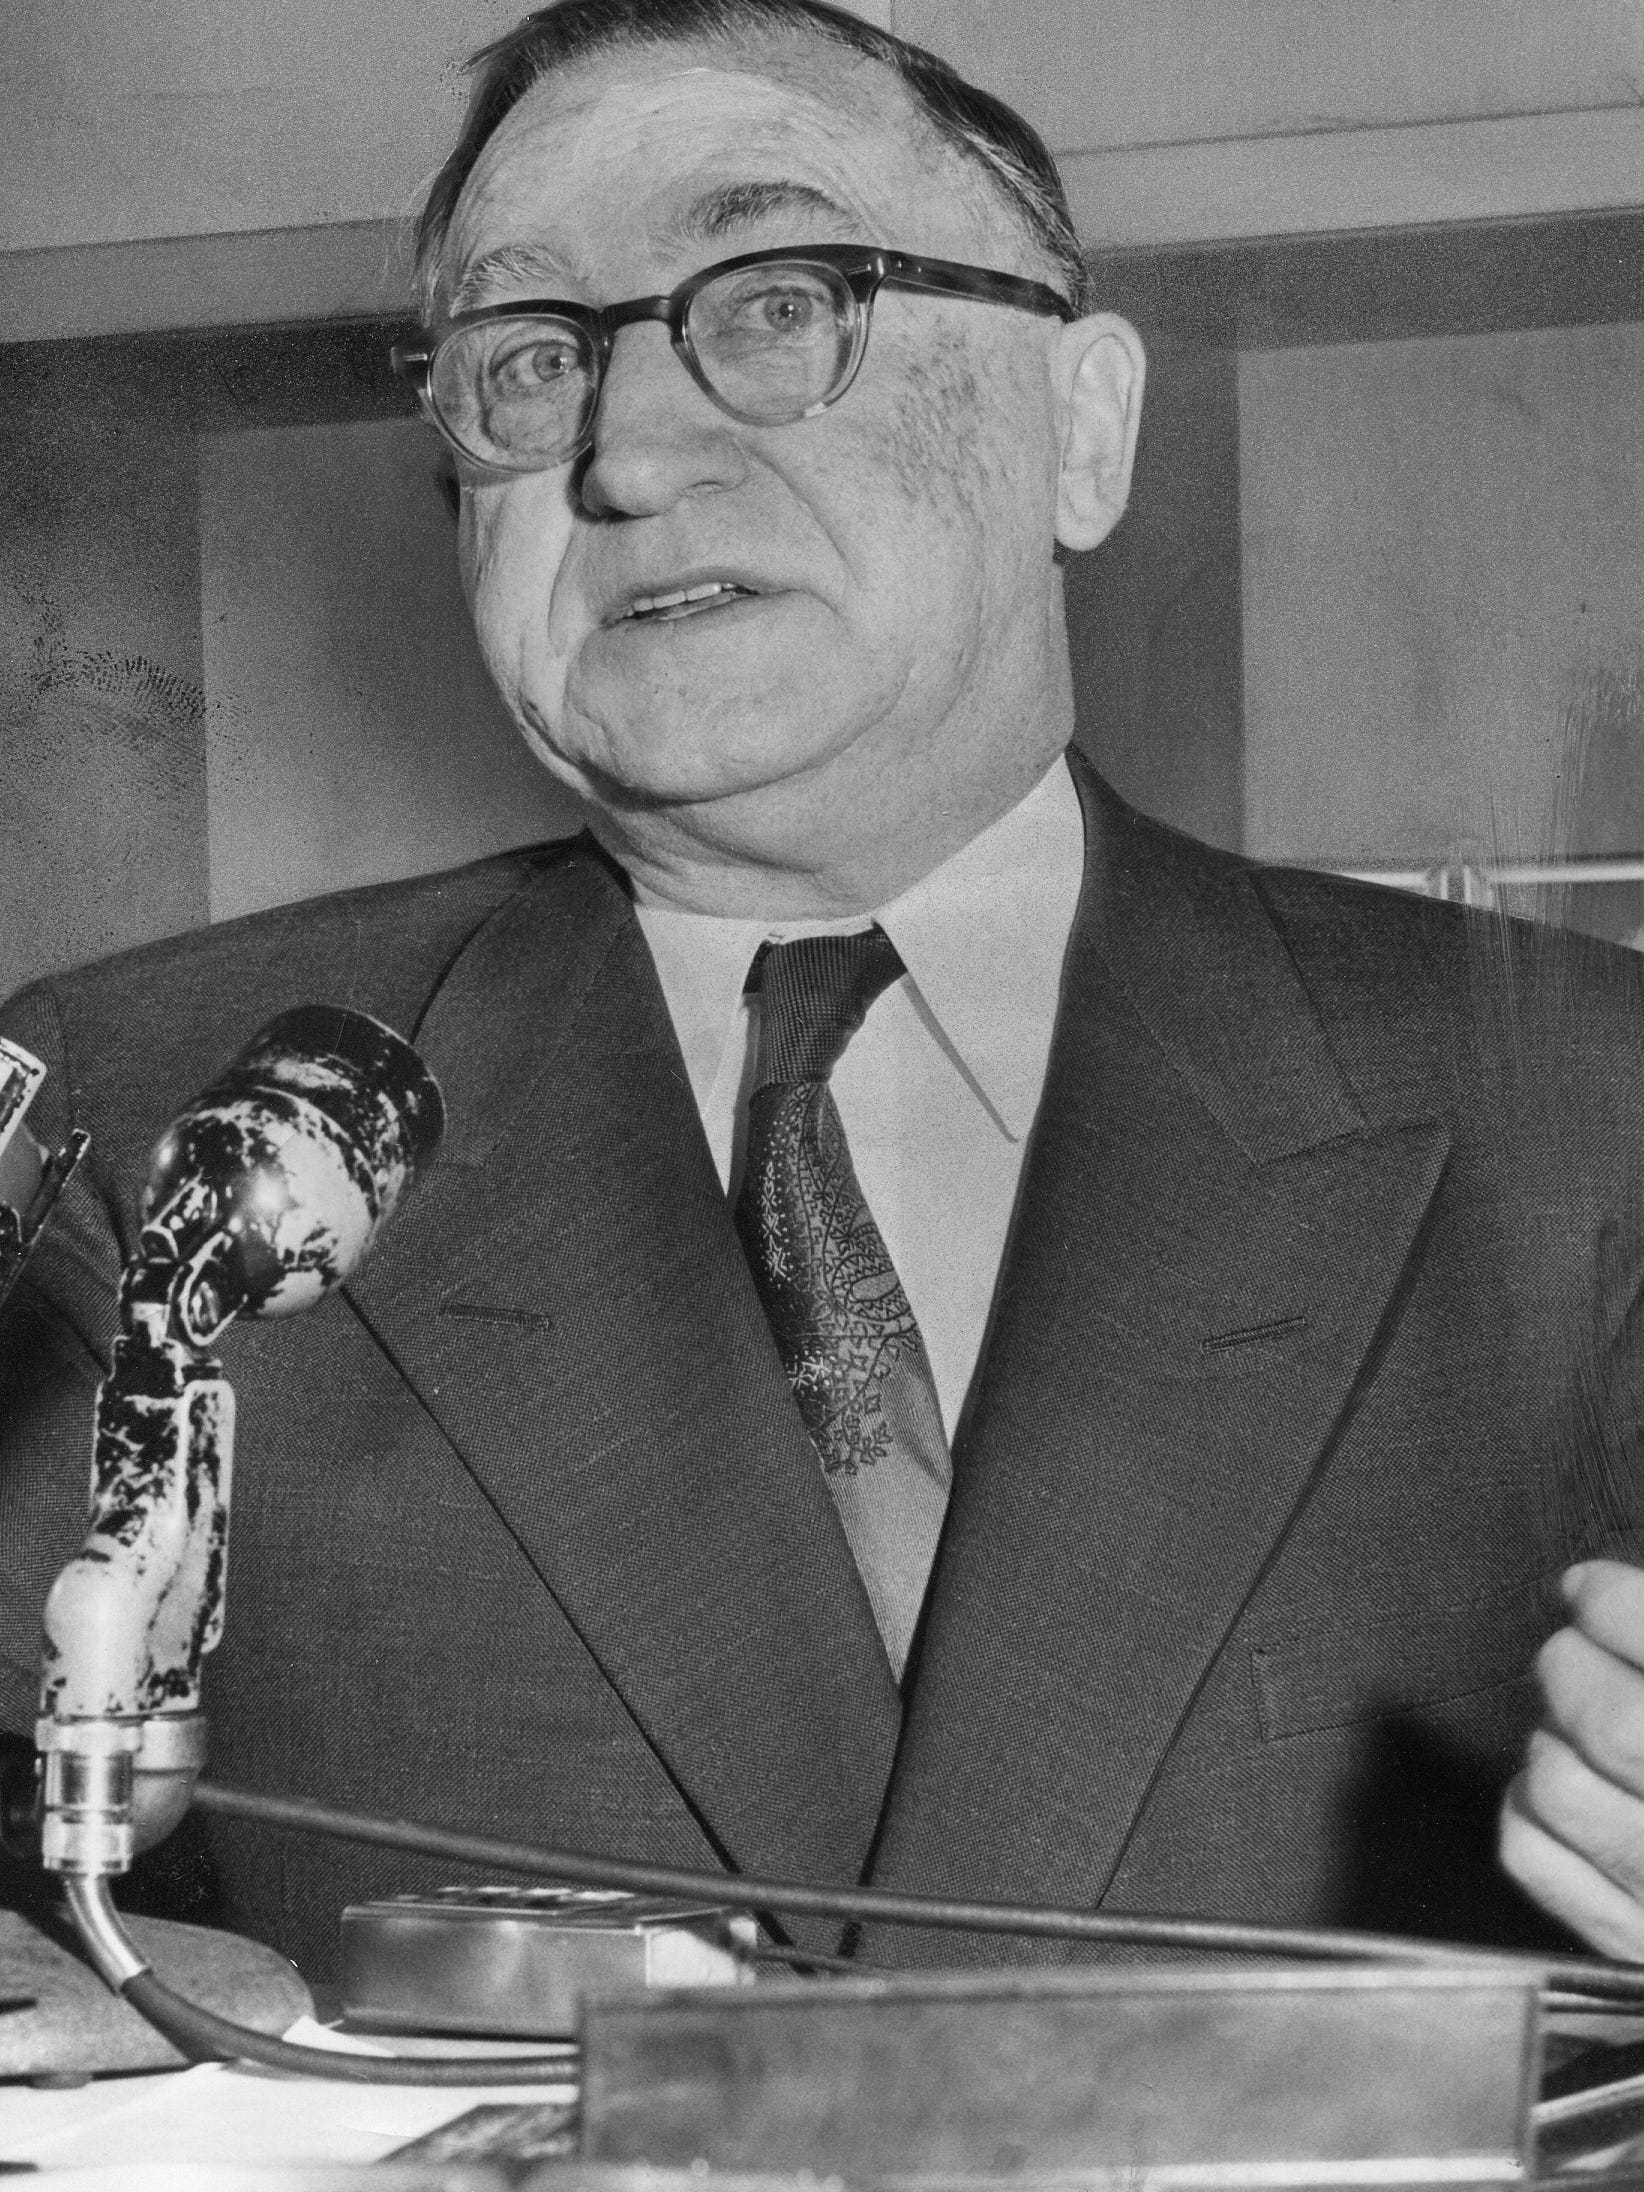 Detroit Mayor Albert Cobo announces he will not seek re-election Feb. 14, 1956. He died in 1957, without ever seeing the convention center he had envisioned completed.